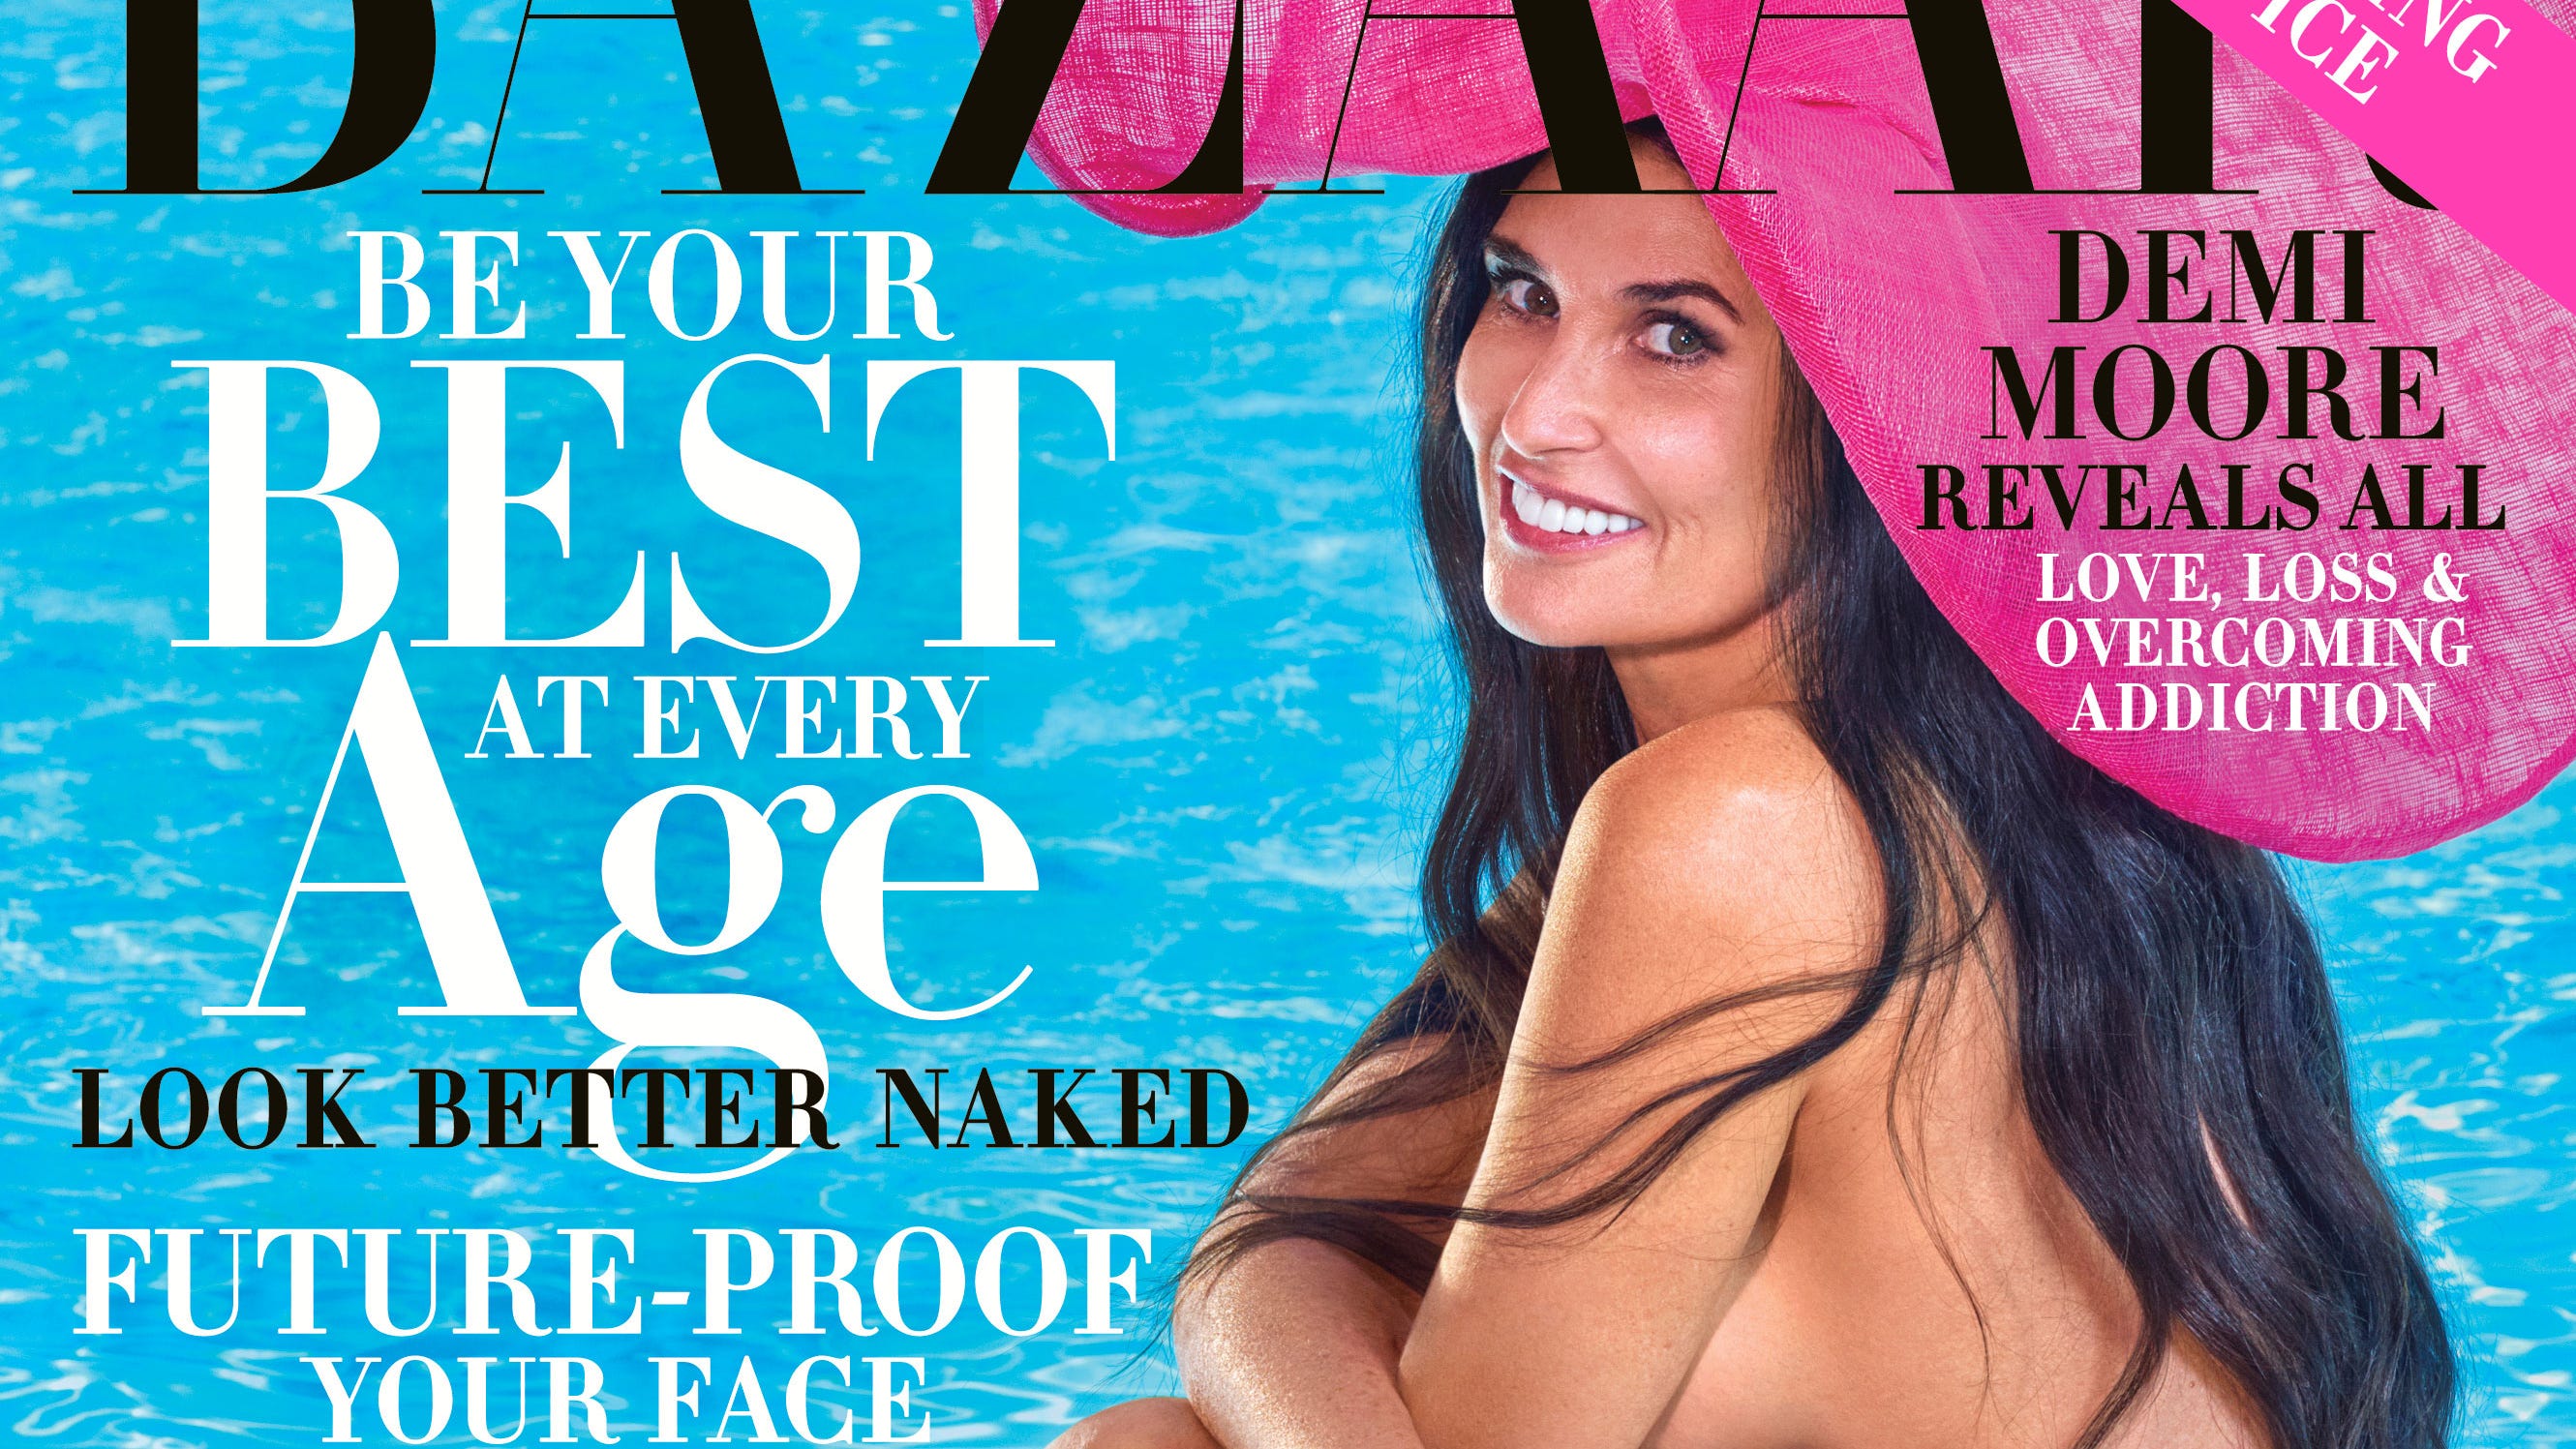 Demi Moore Blowjob Porn - Demi Moore strips on Harper's Bazaar cover, talks miscarriage, sobriety